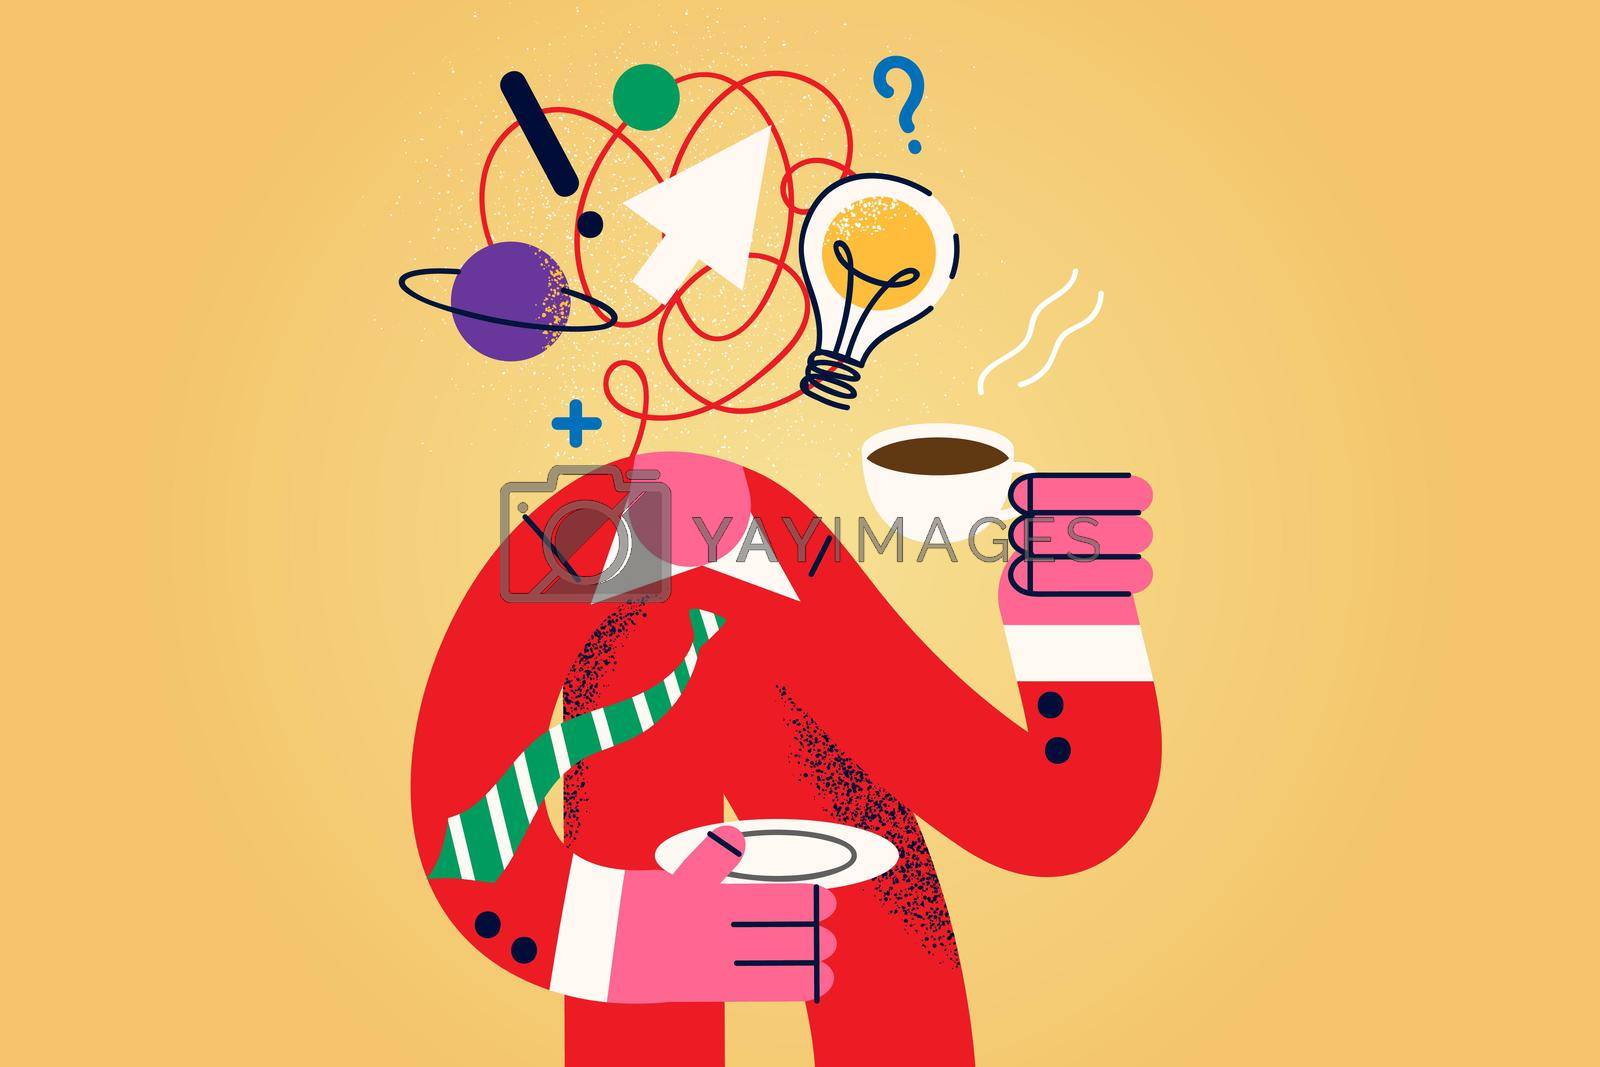 Headless man drink coffee in morning generate ideas in head. Male enjoy refreshing hot drink brainstorm develop business strategies or plans. Routine, habit concept. Flat vector illustration.